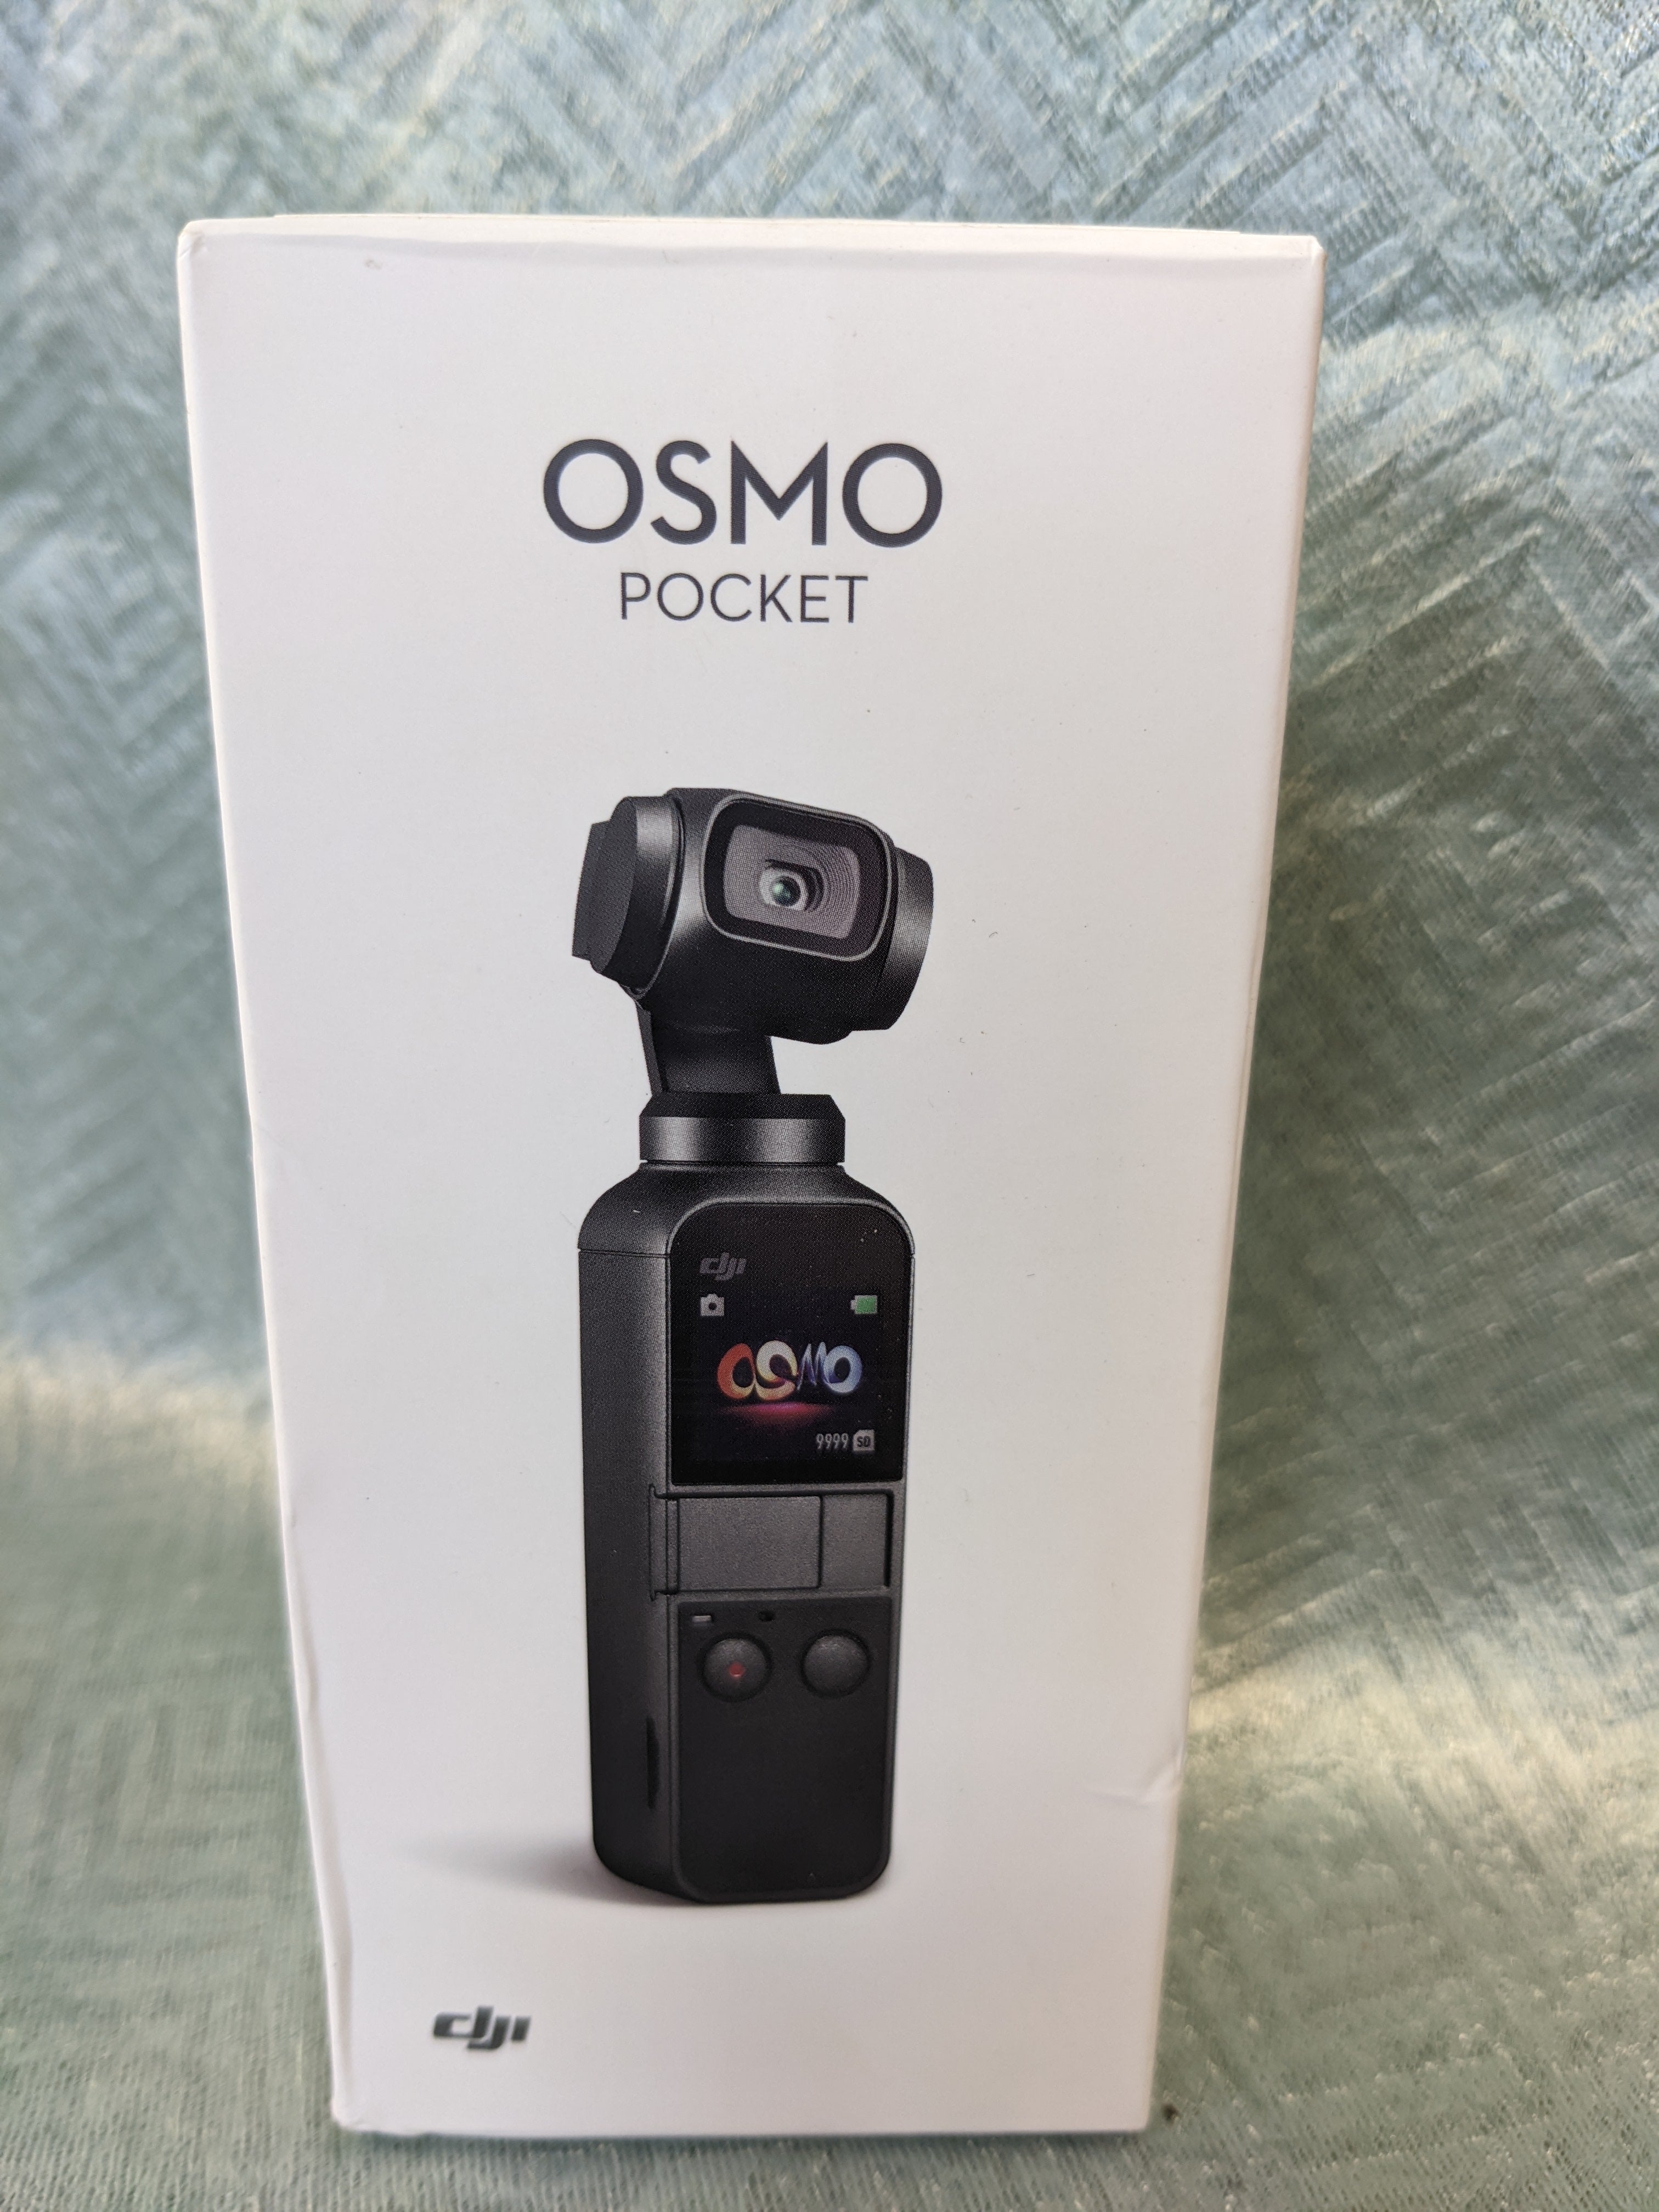 DJI Osmo Pocket Handheld 3-Axis 4k Gimbal Stabilizer with Integrated Camera (7522144059630)